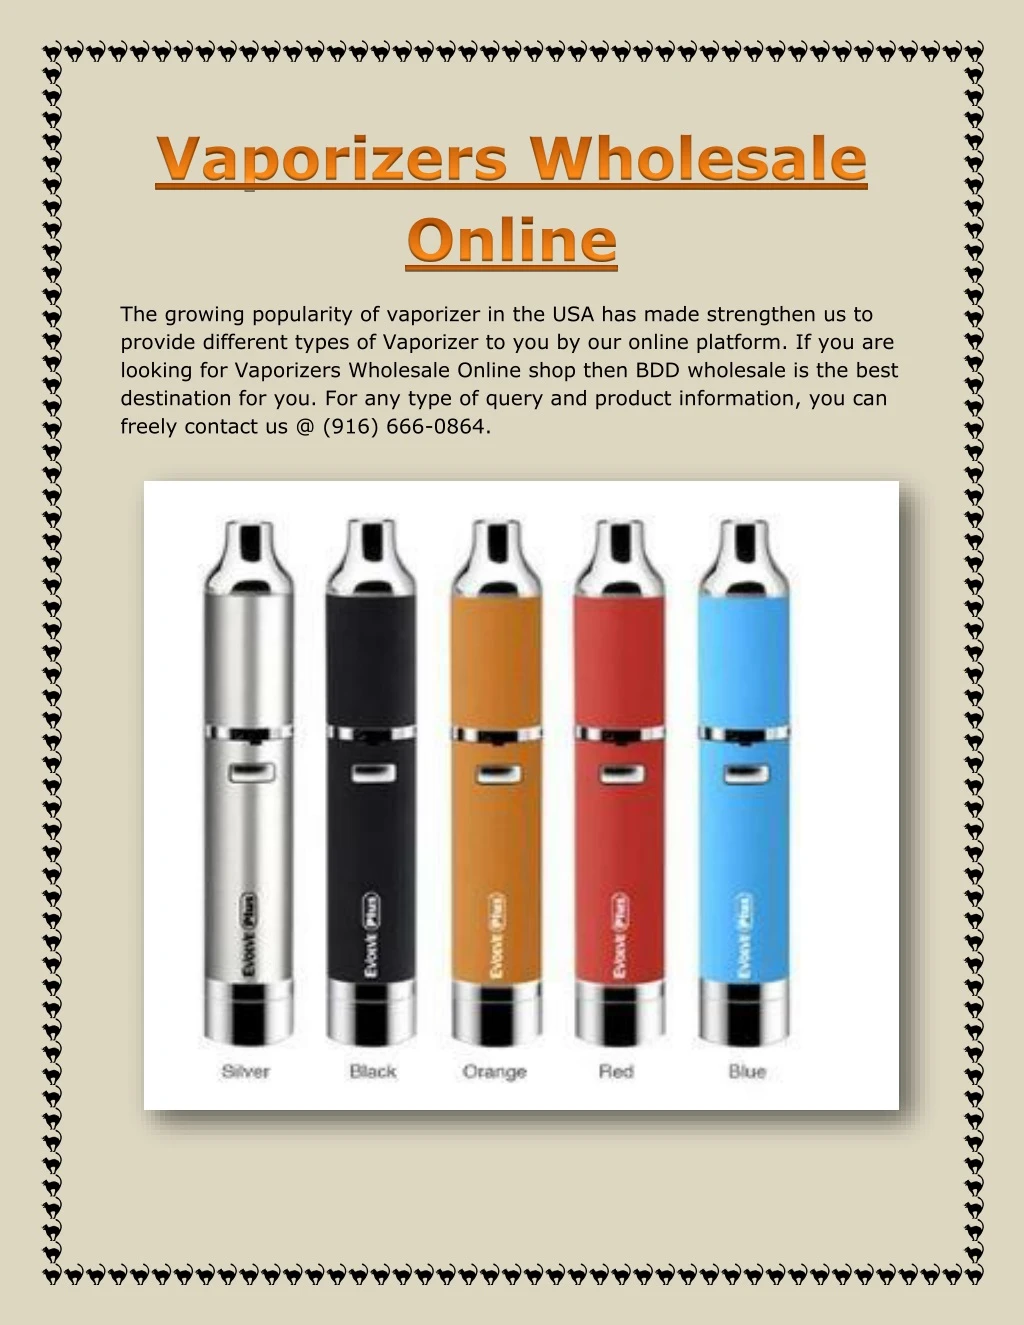 the growing popularity of vaporizer